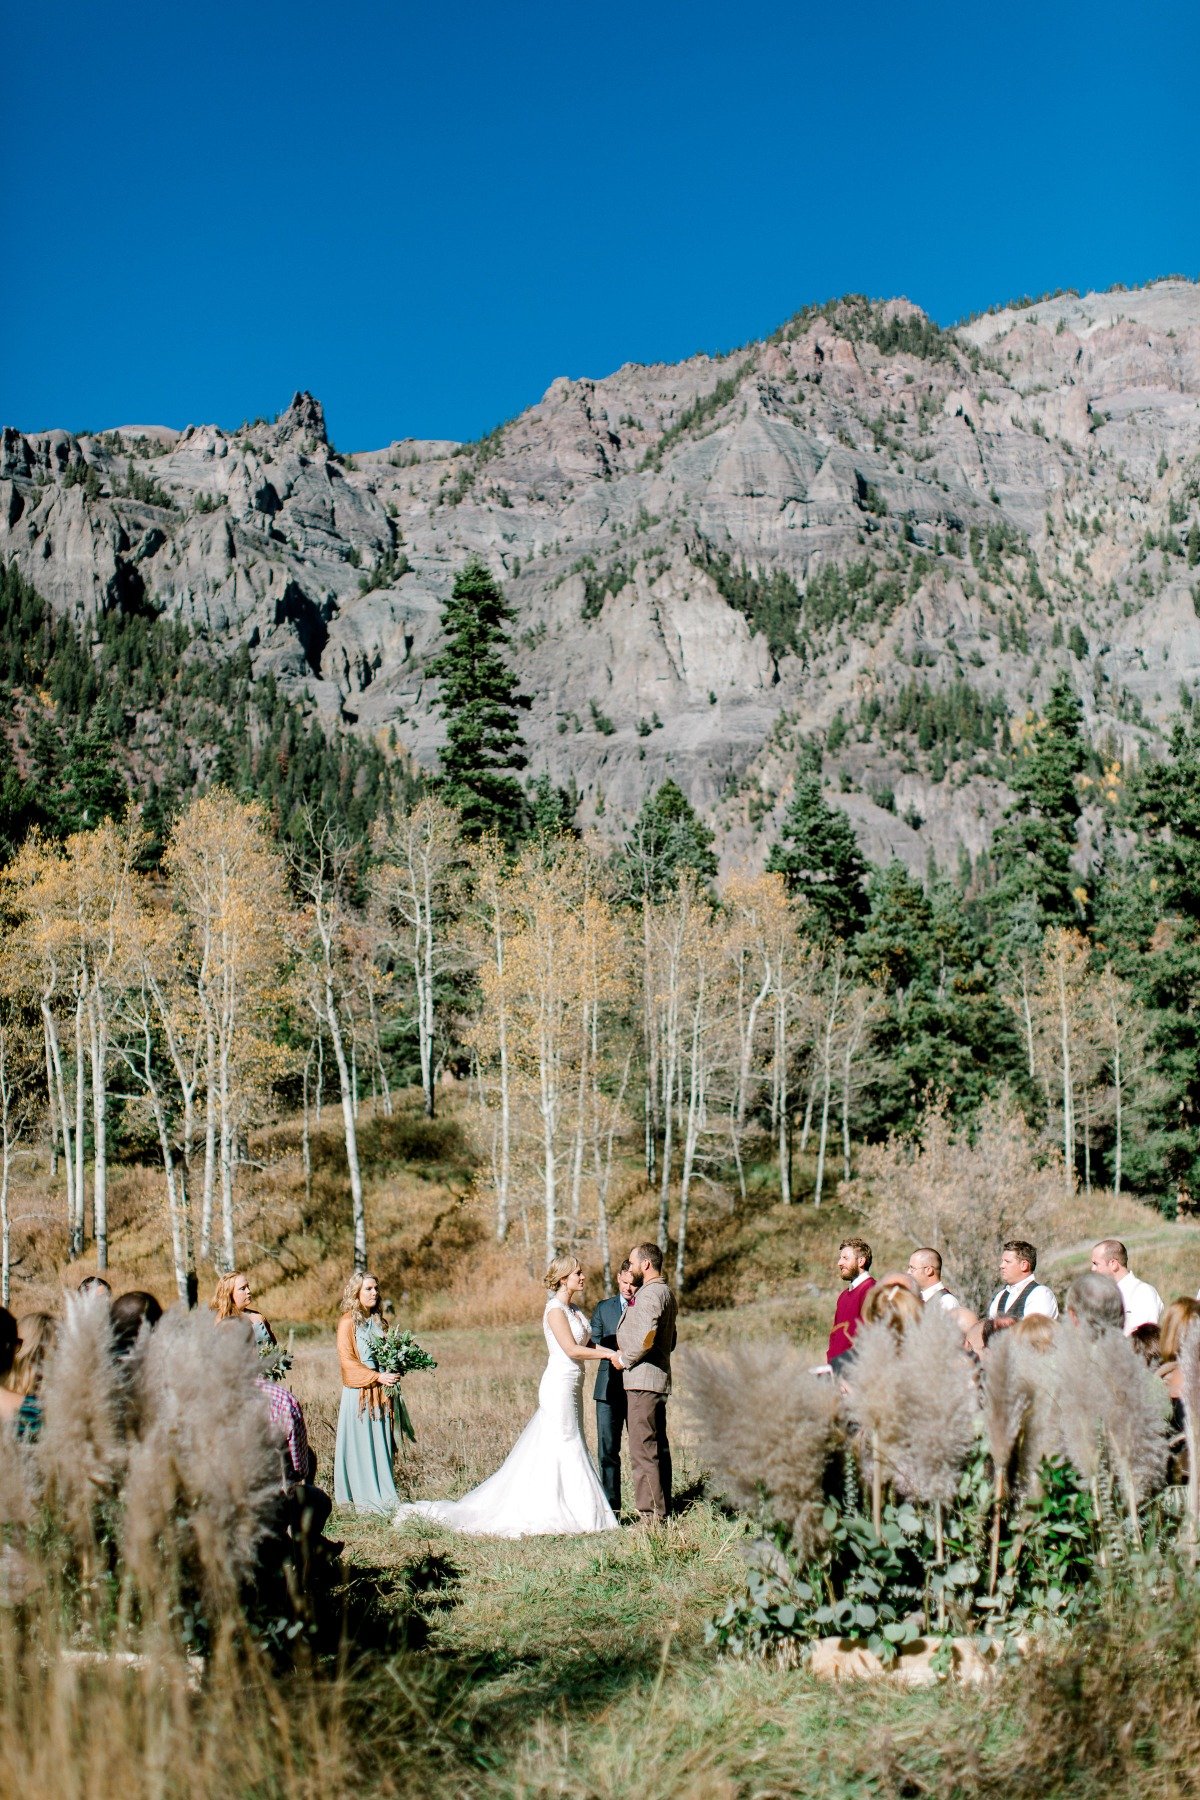 How To Have A Mountain Adventure Wedding